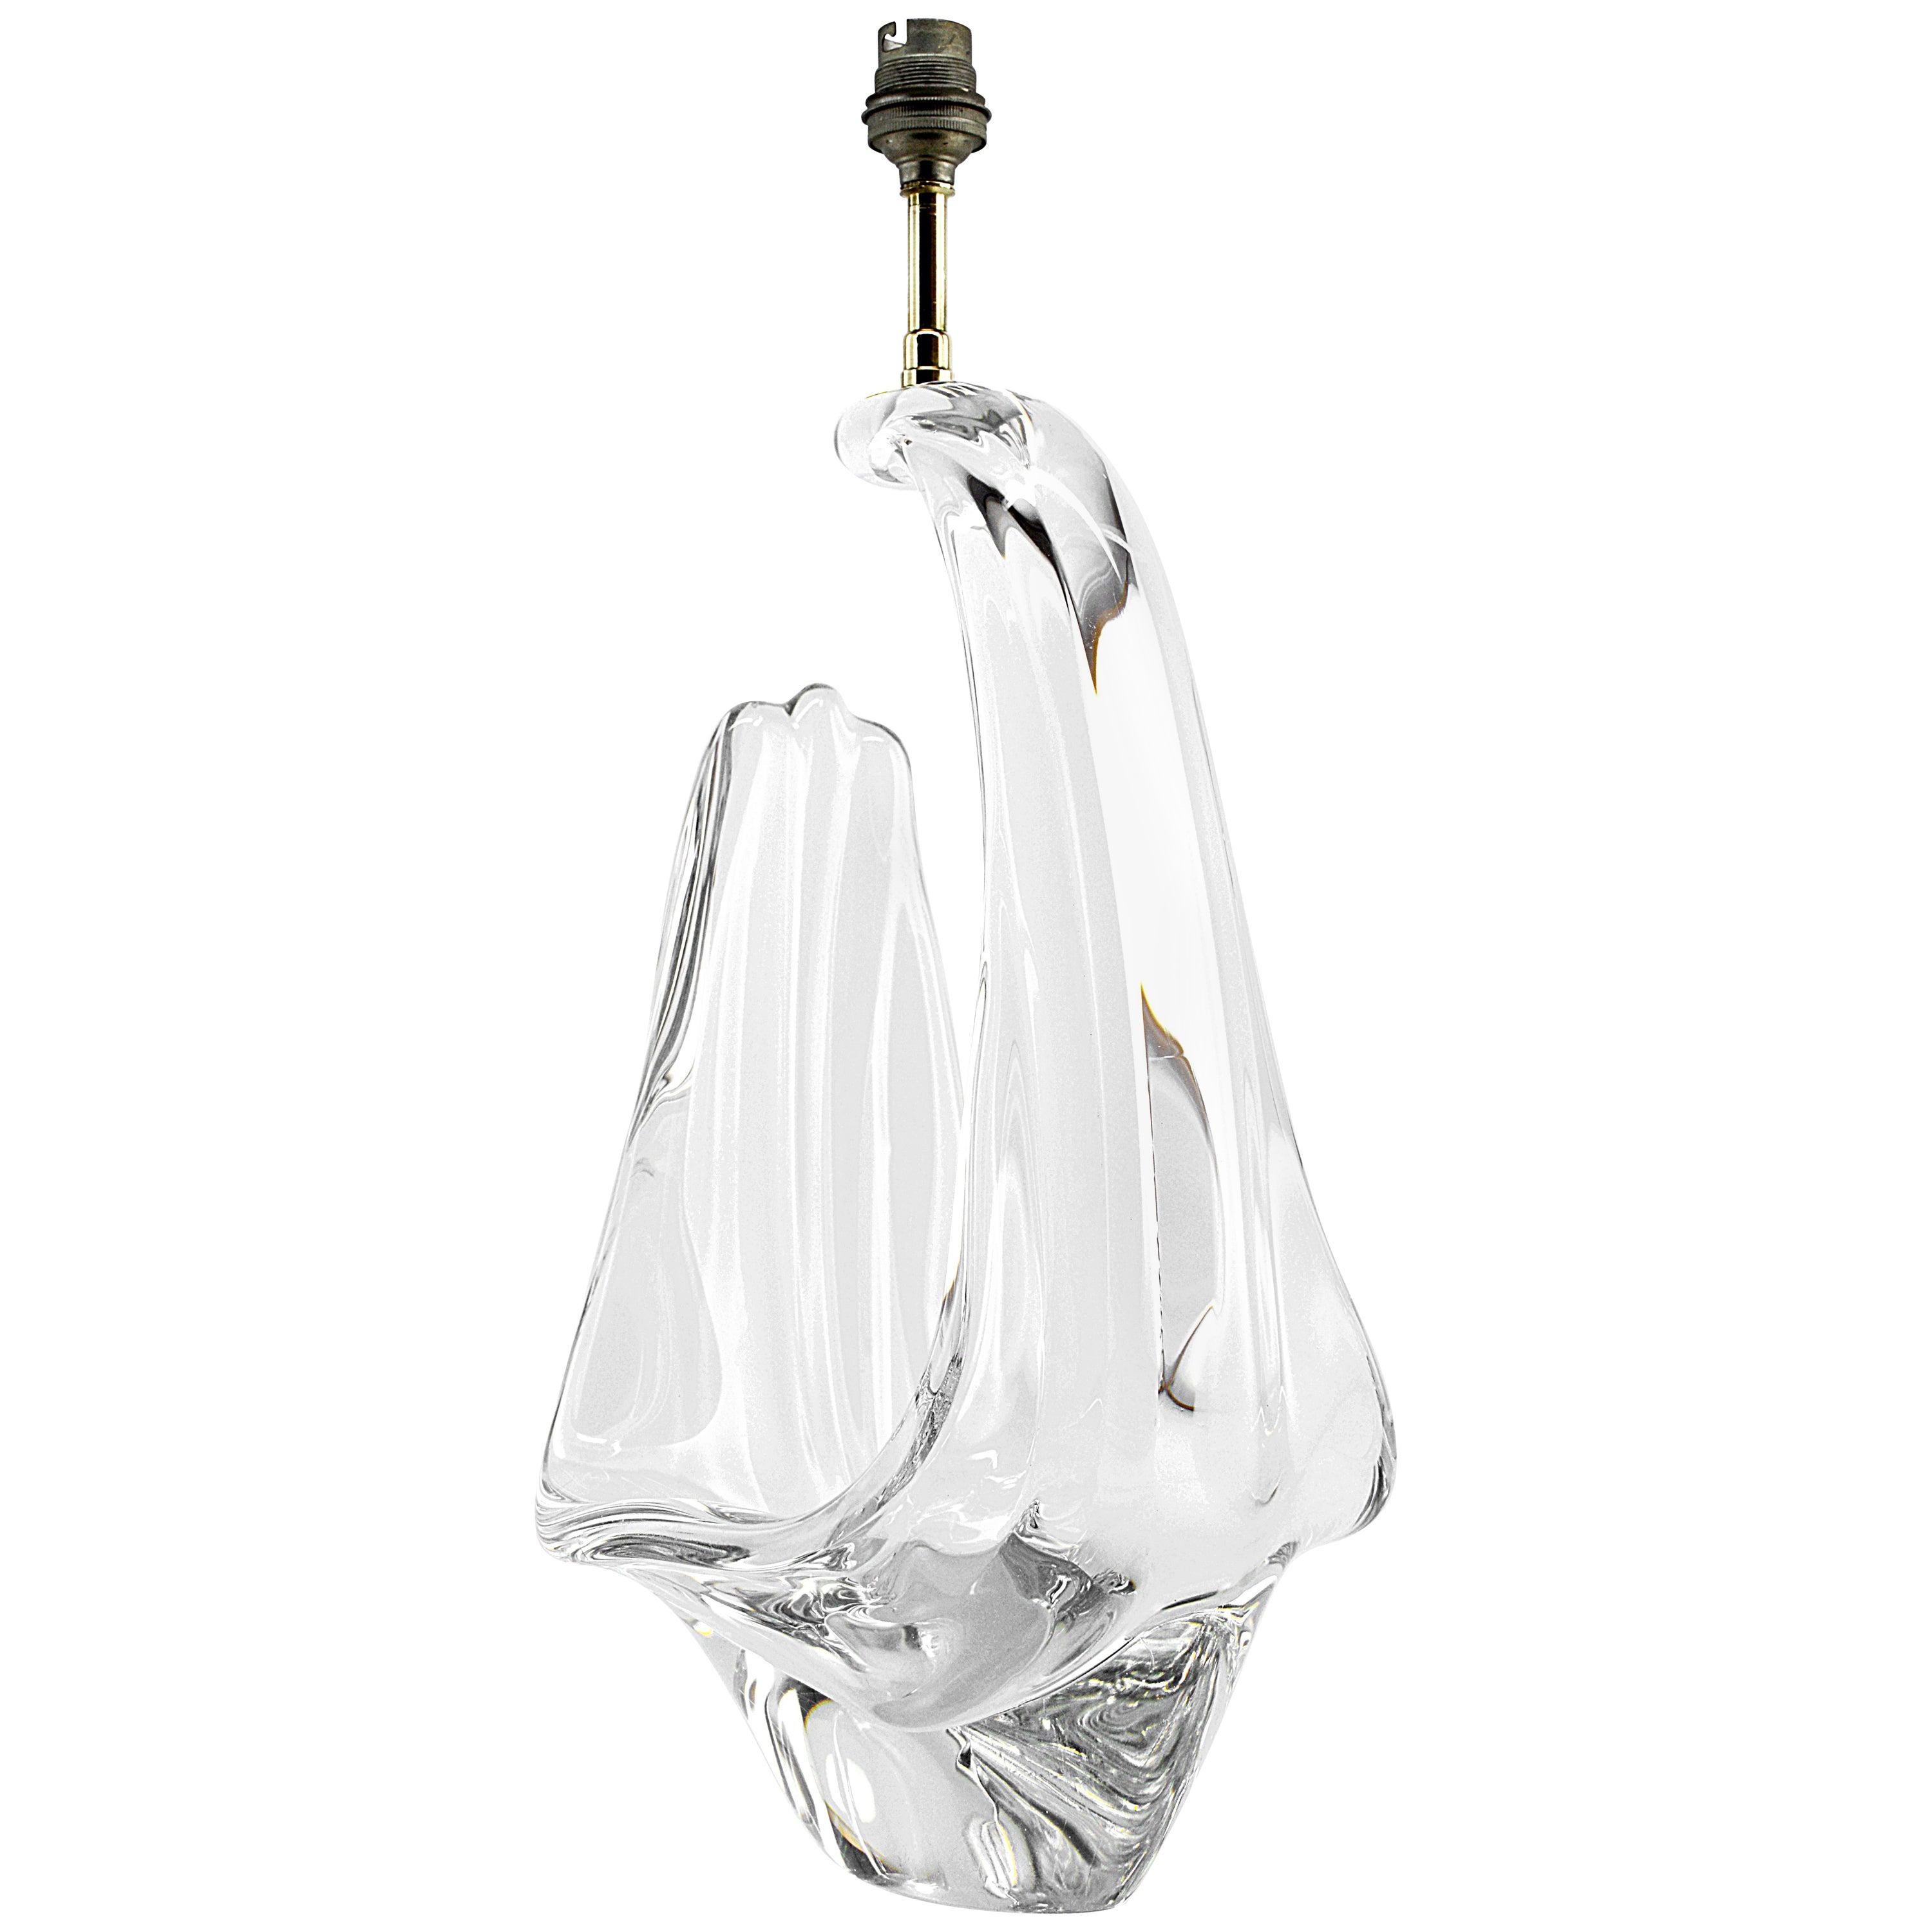 Schneider Cristalleries French Midcentury Crystal Table Lamp, 1950s